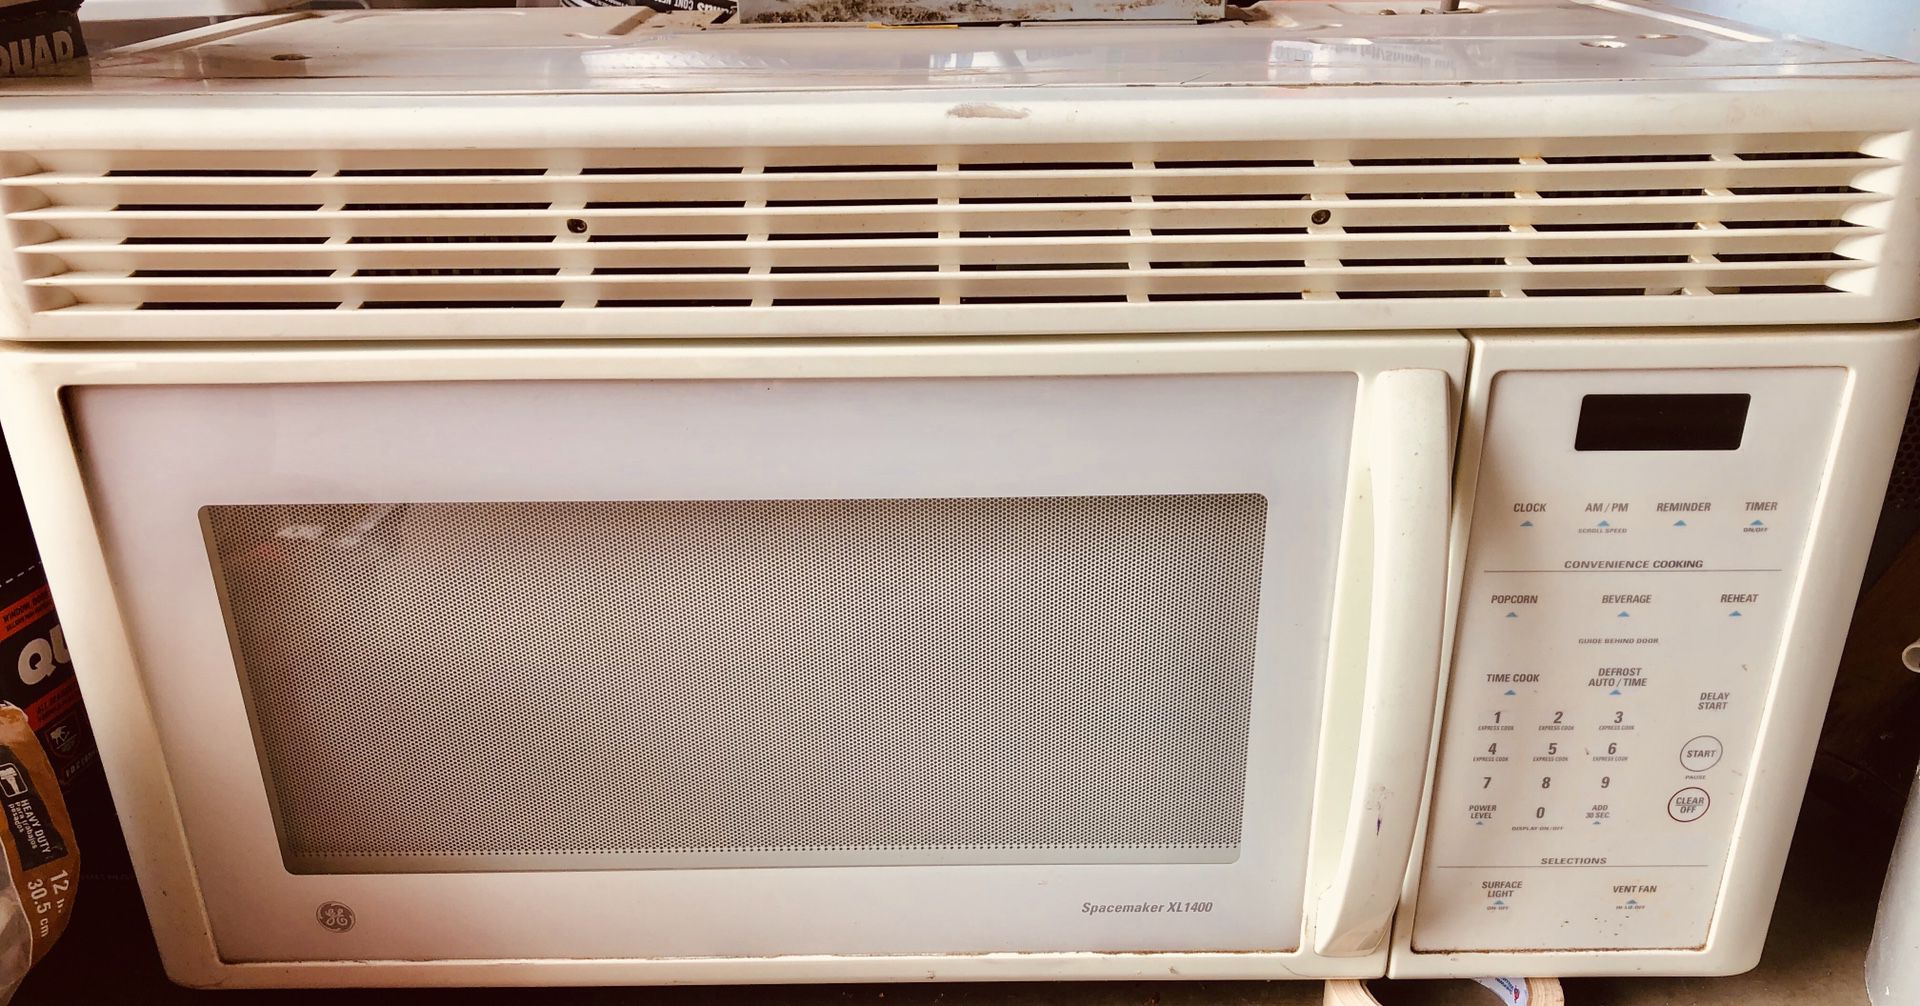 Free porch pickup- must take both!! GE Spacemaker XL1400 microwave with hood vent